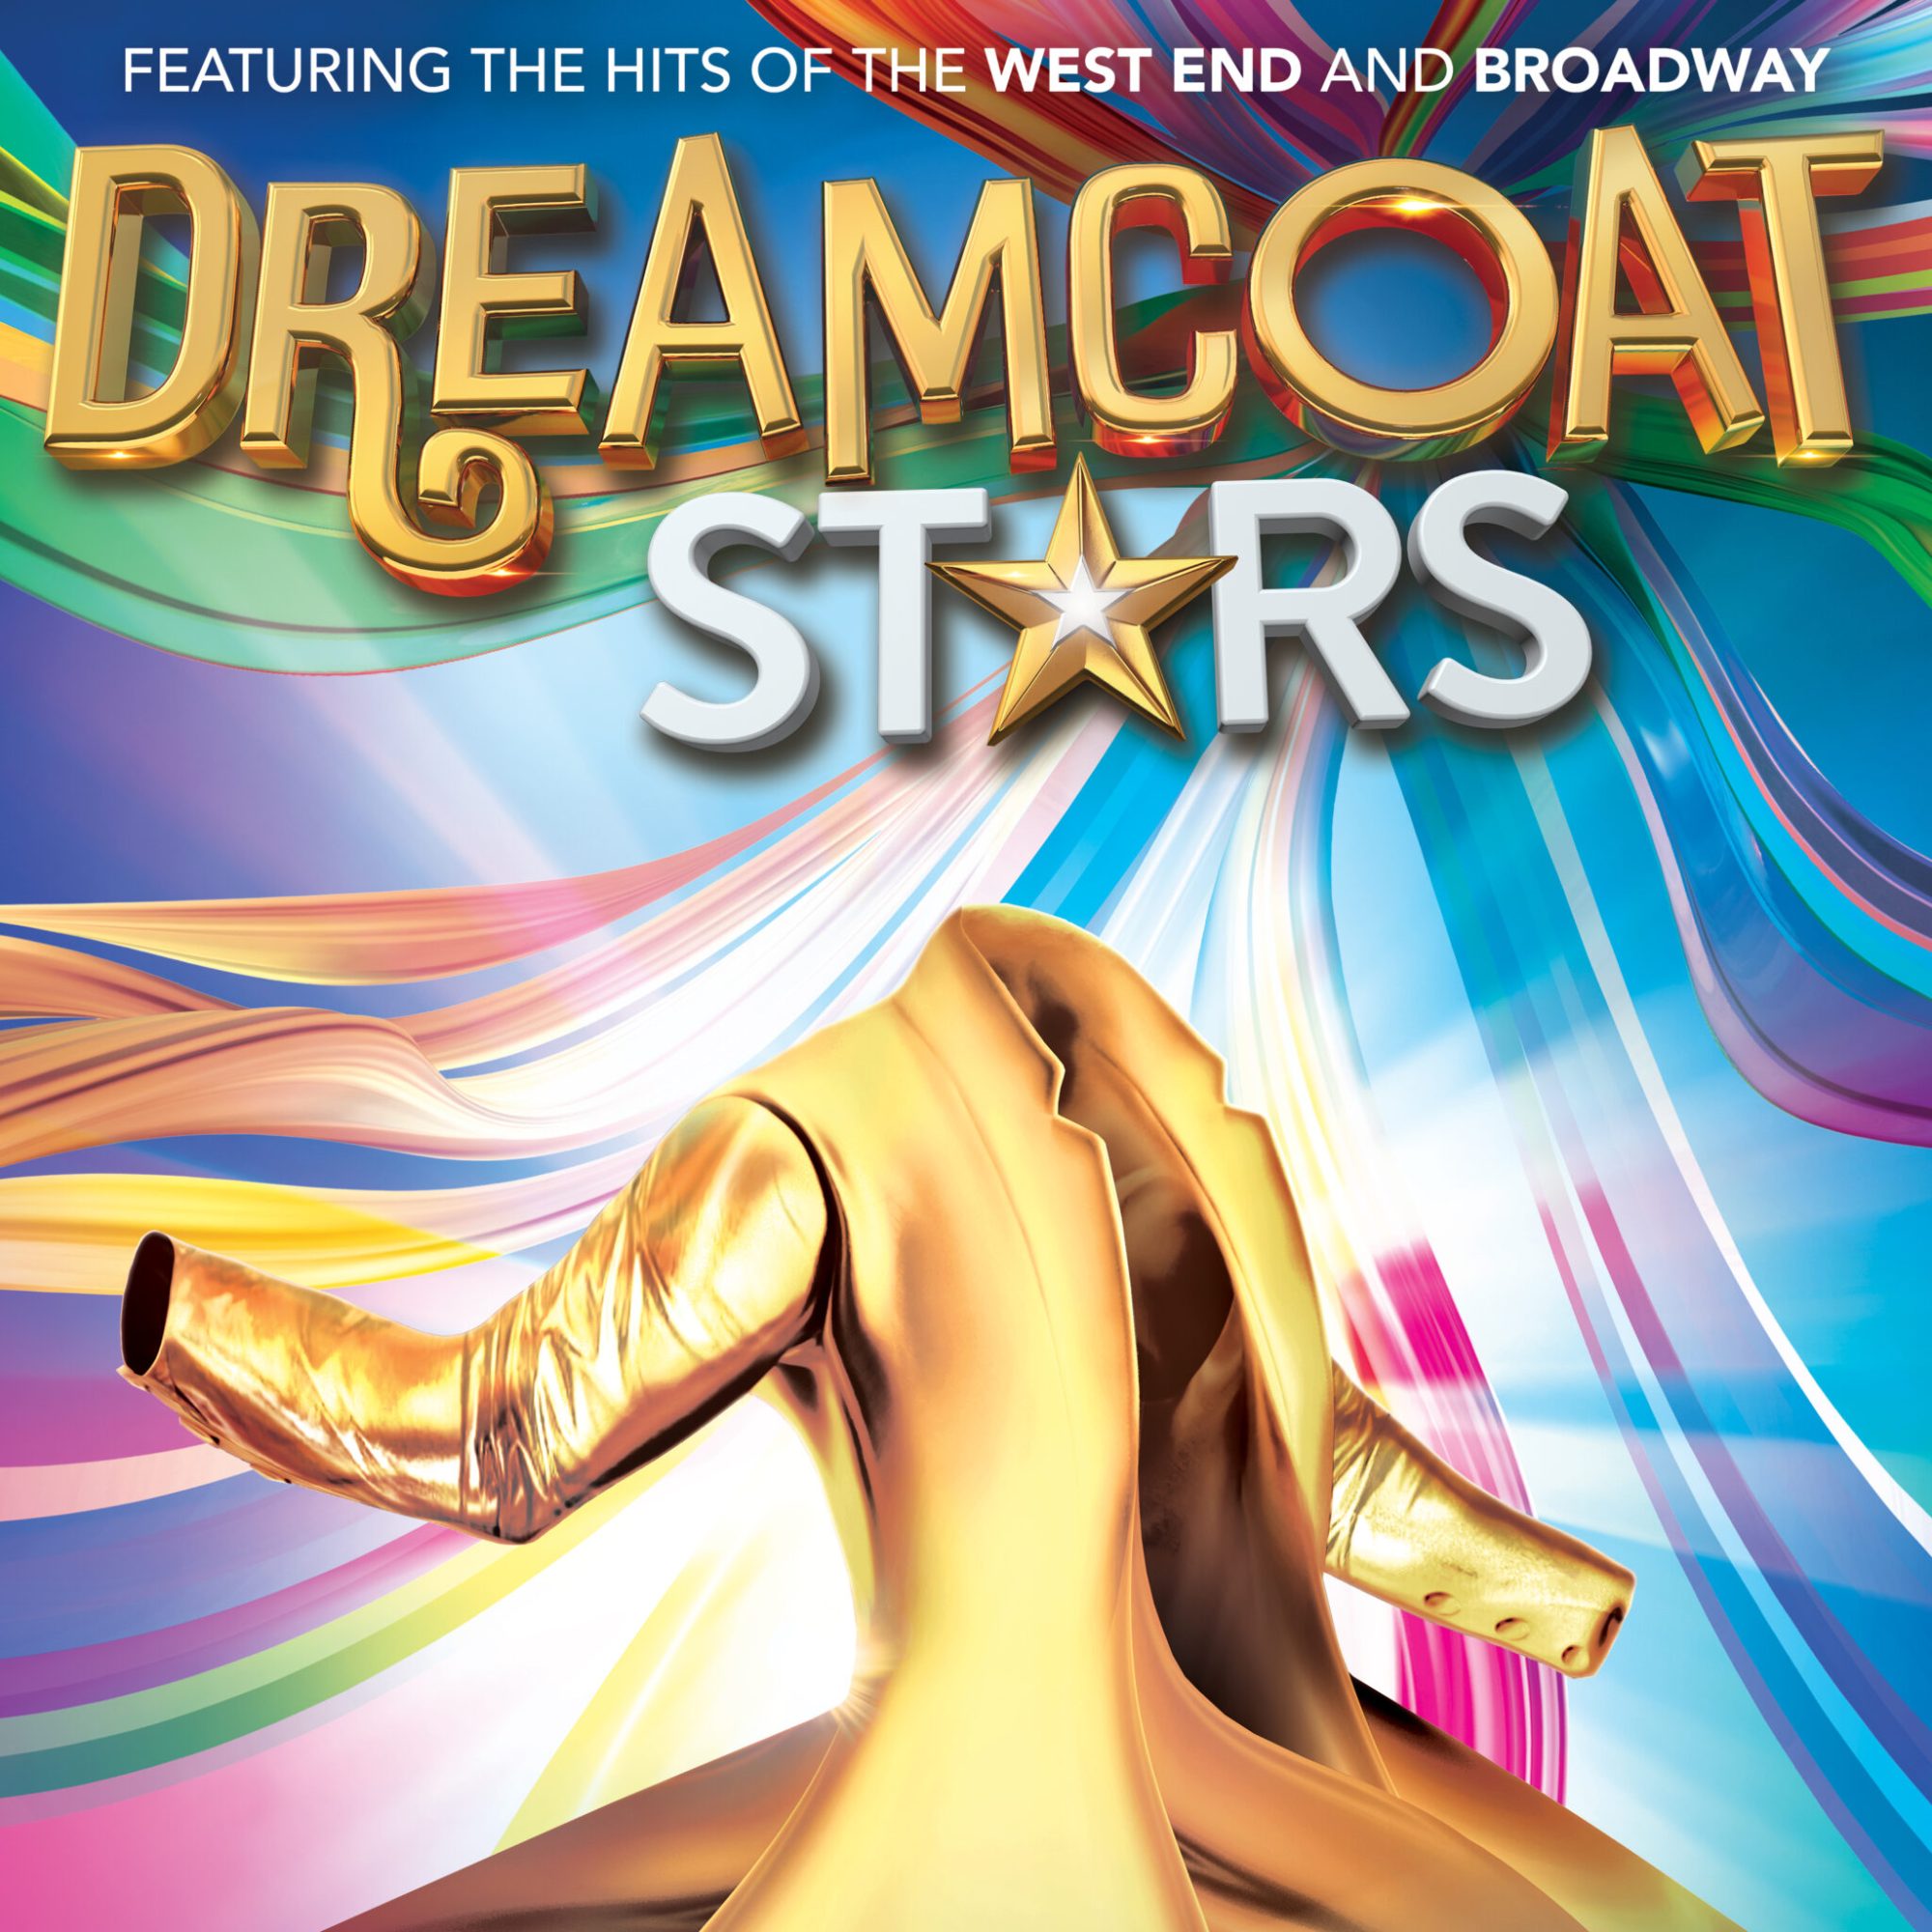 Dreamcoat Stars: A Night of Musical Extravaganza!